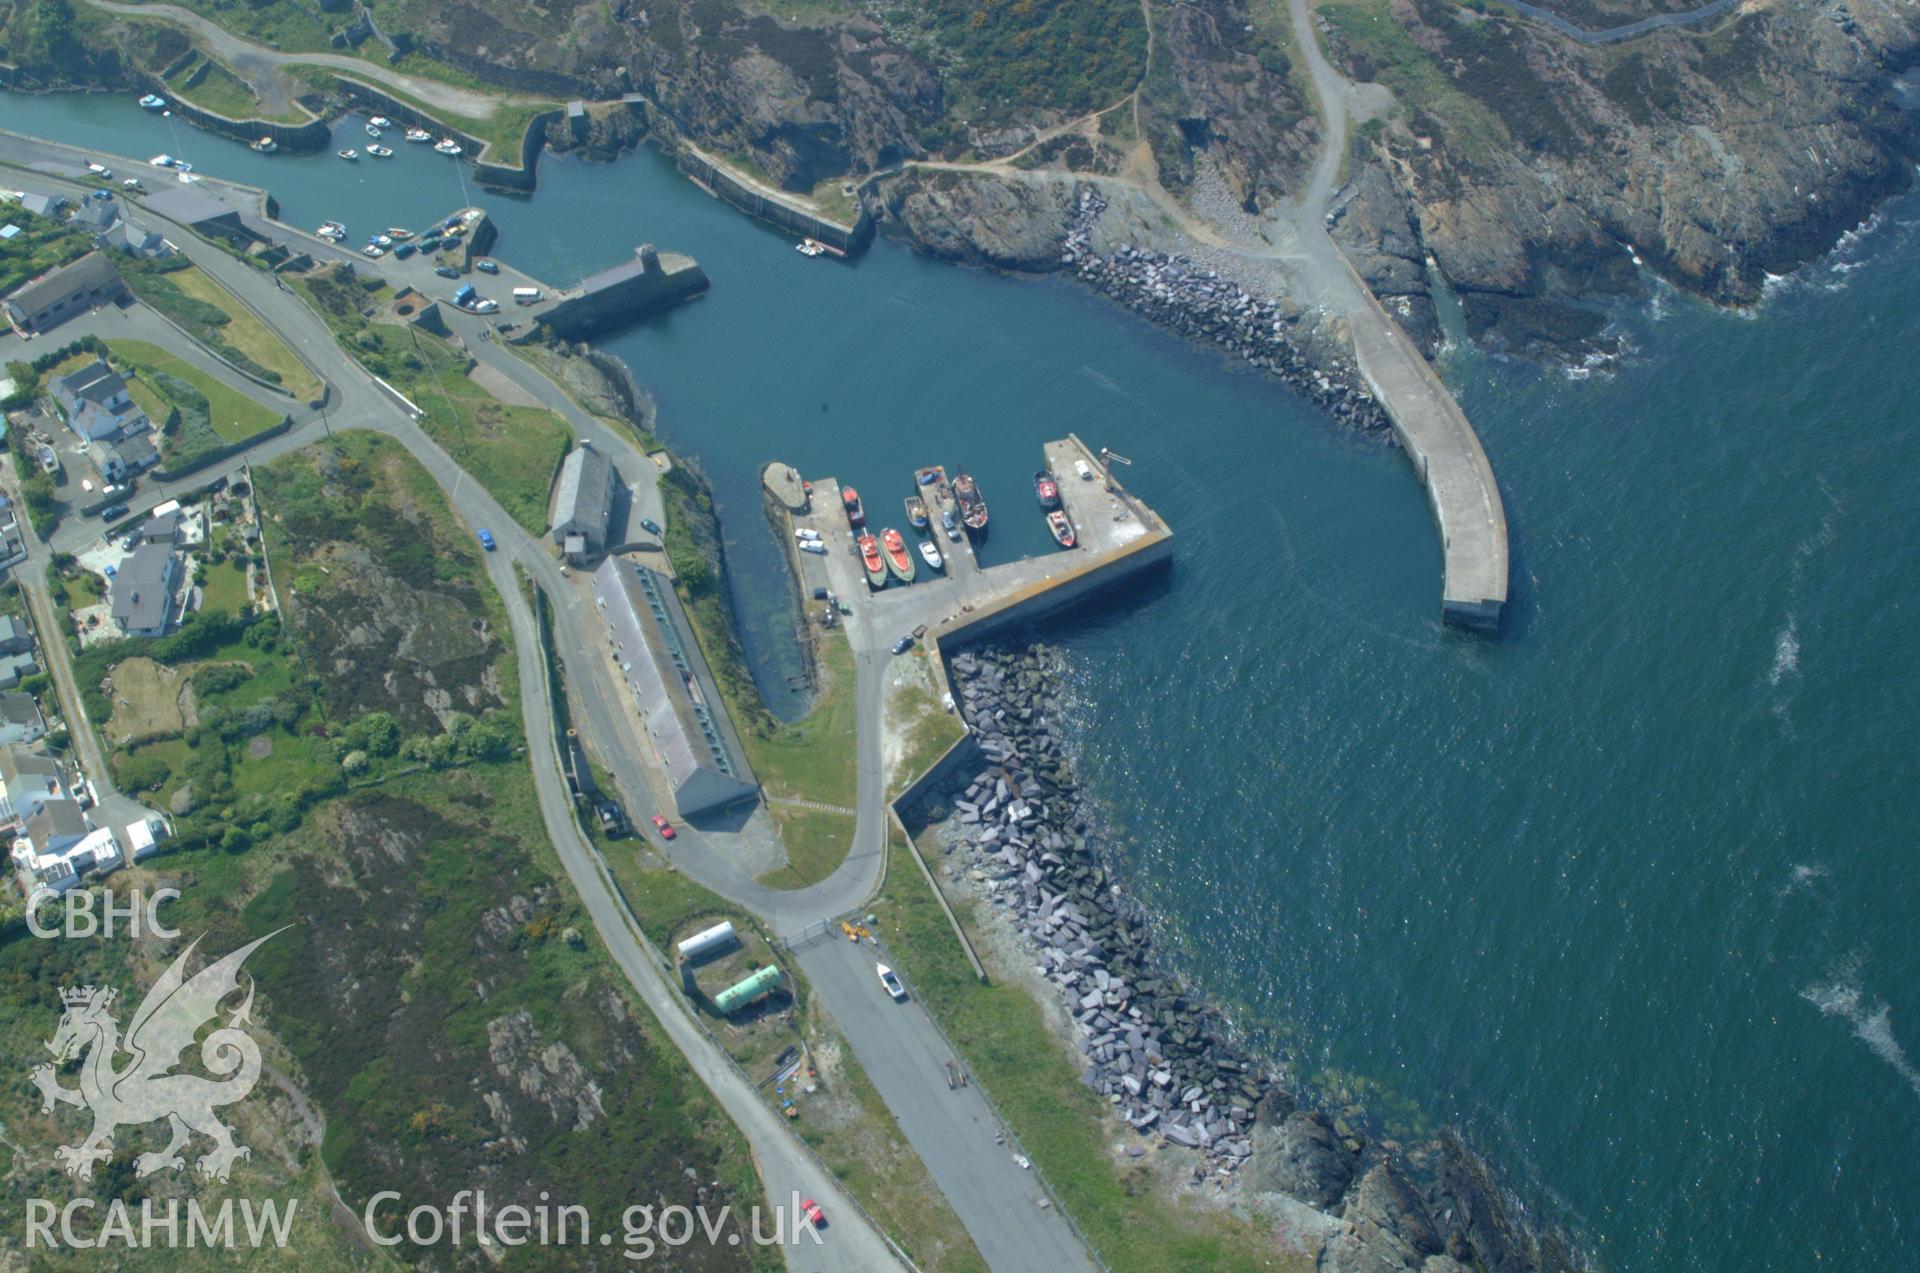 RCAHMW colour oblique aerial photograph of Porth Amlwch (Amlwch Port). Taken on 26 May 2004 by Toby Driver